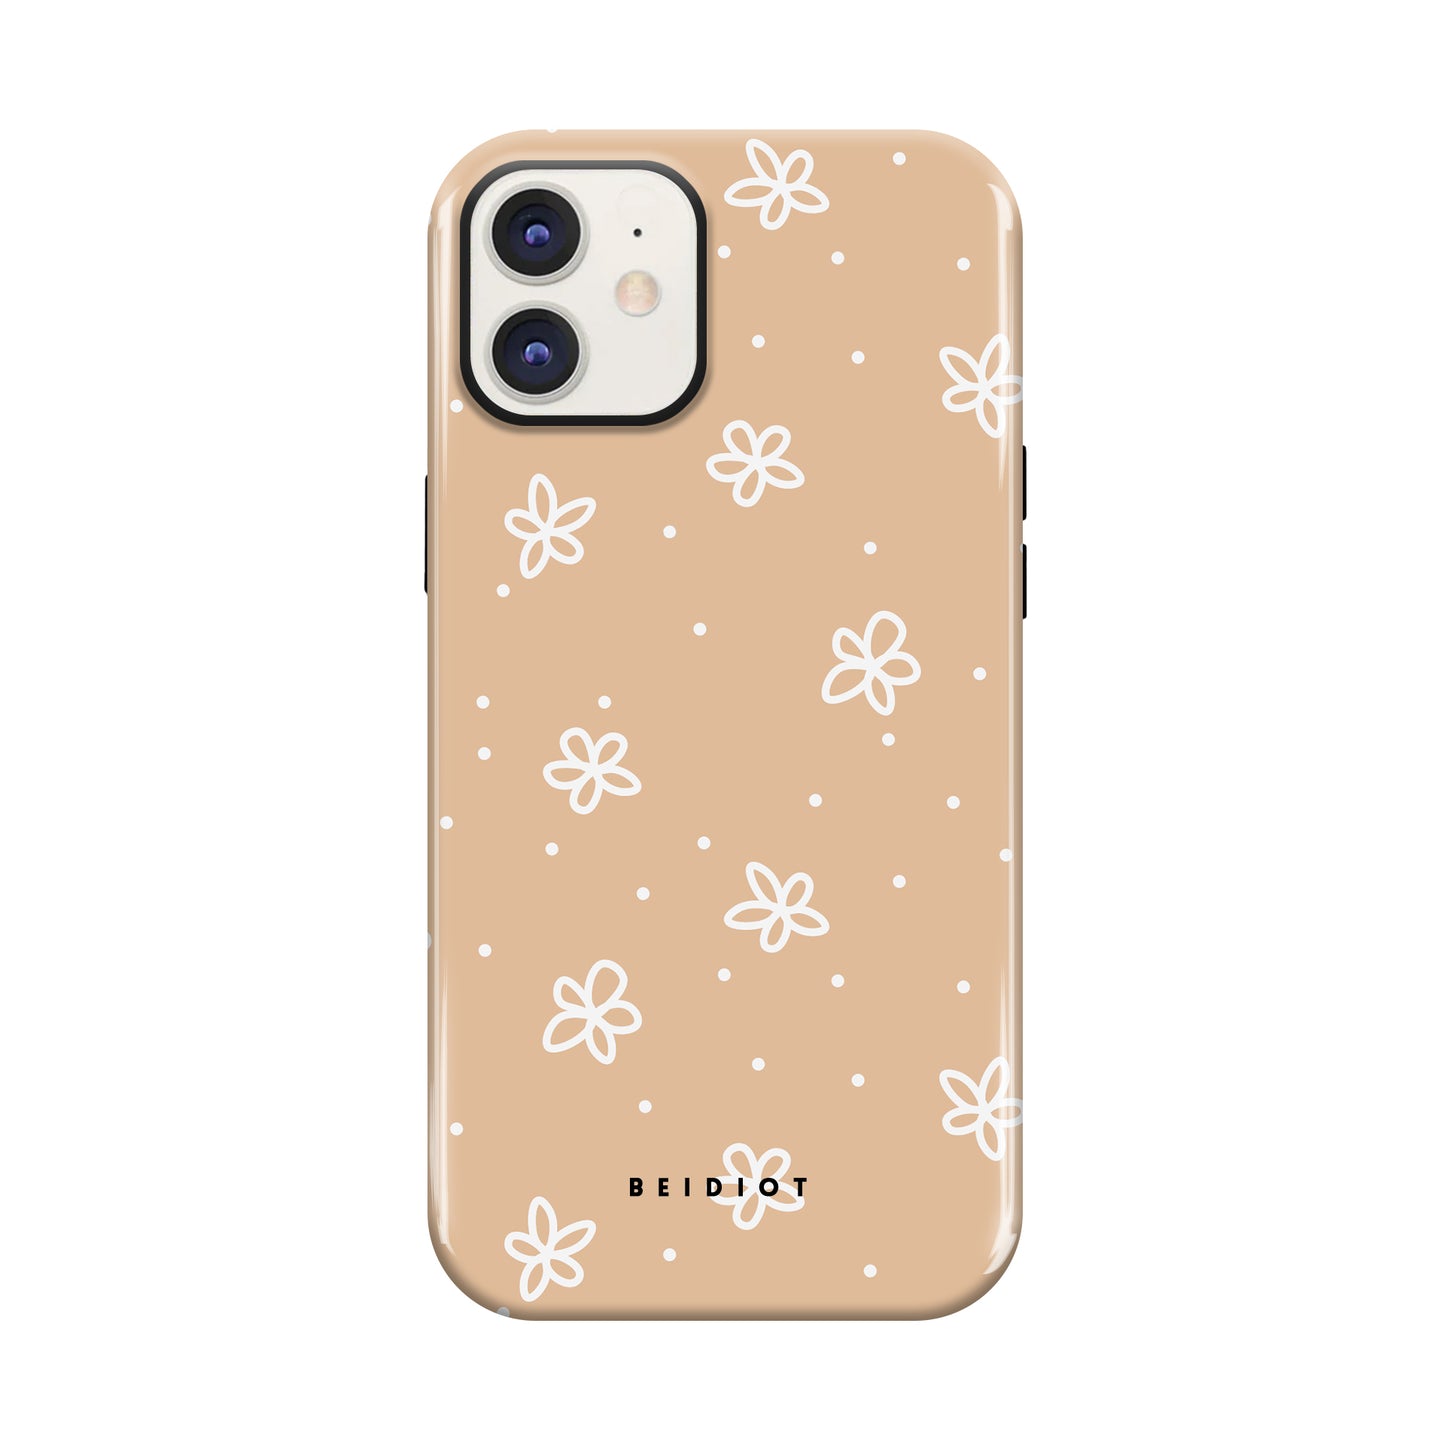 Dotted Daisy - Burlywood iPhone Case